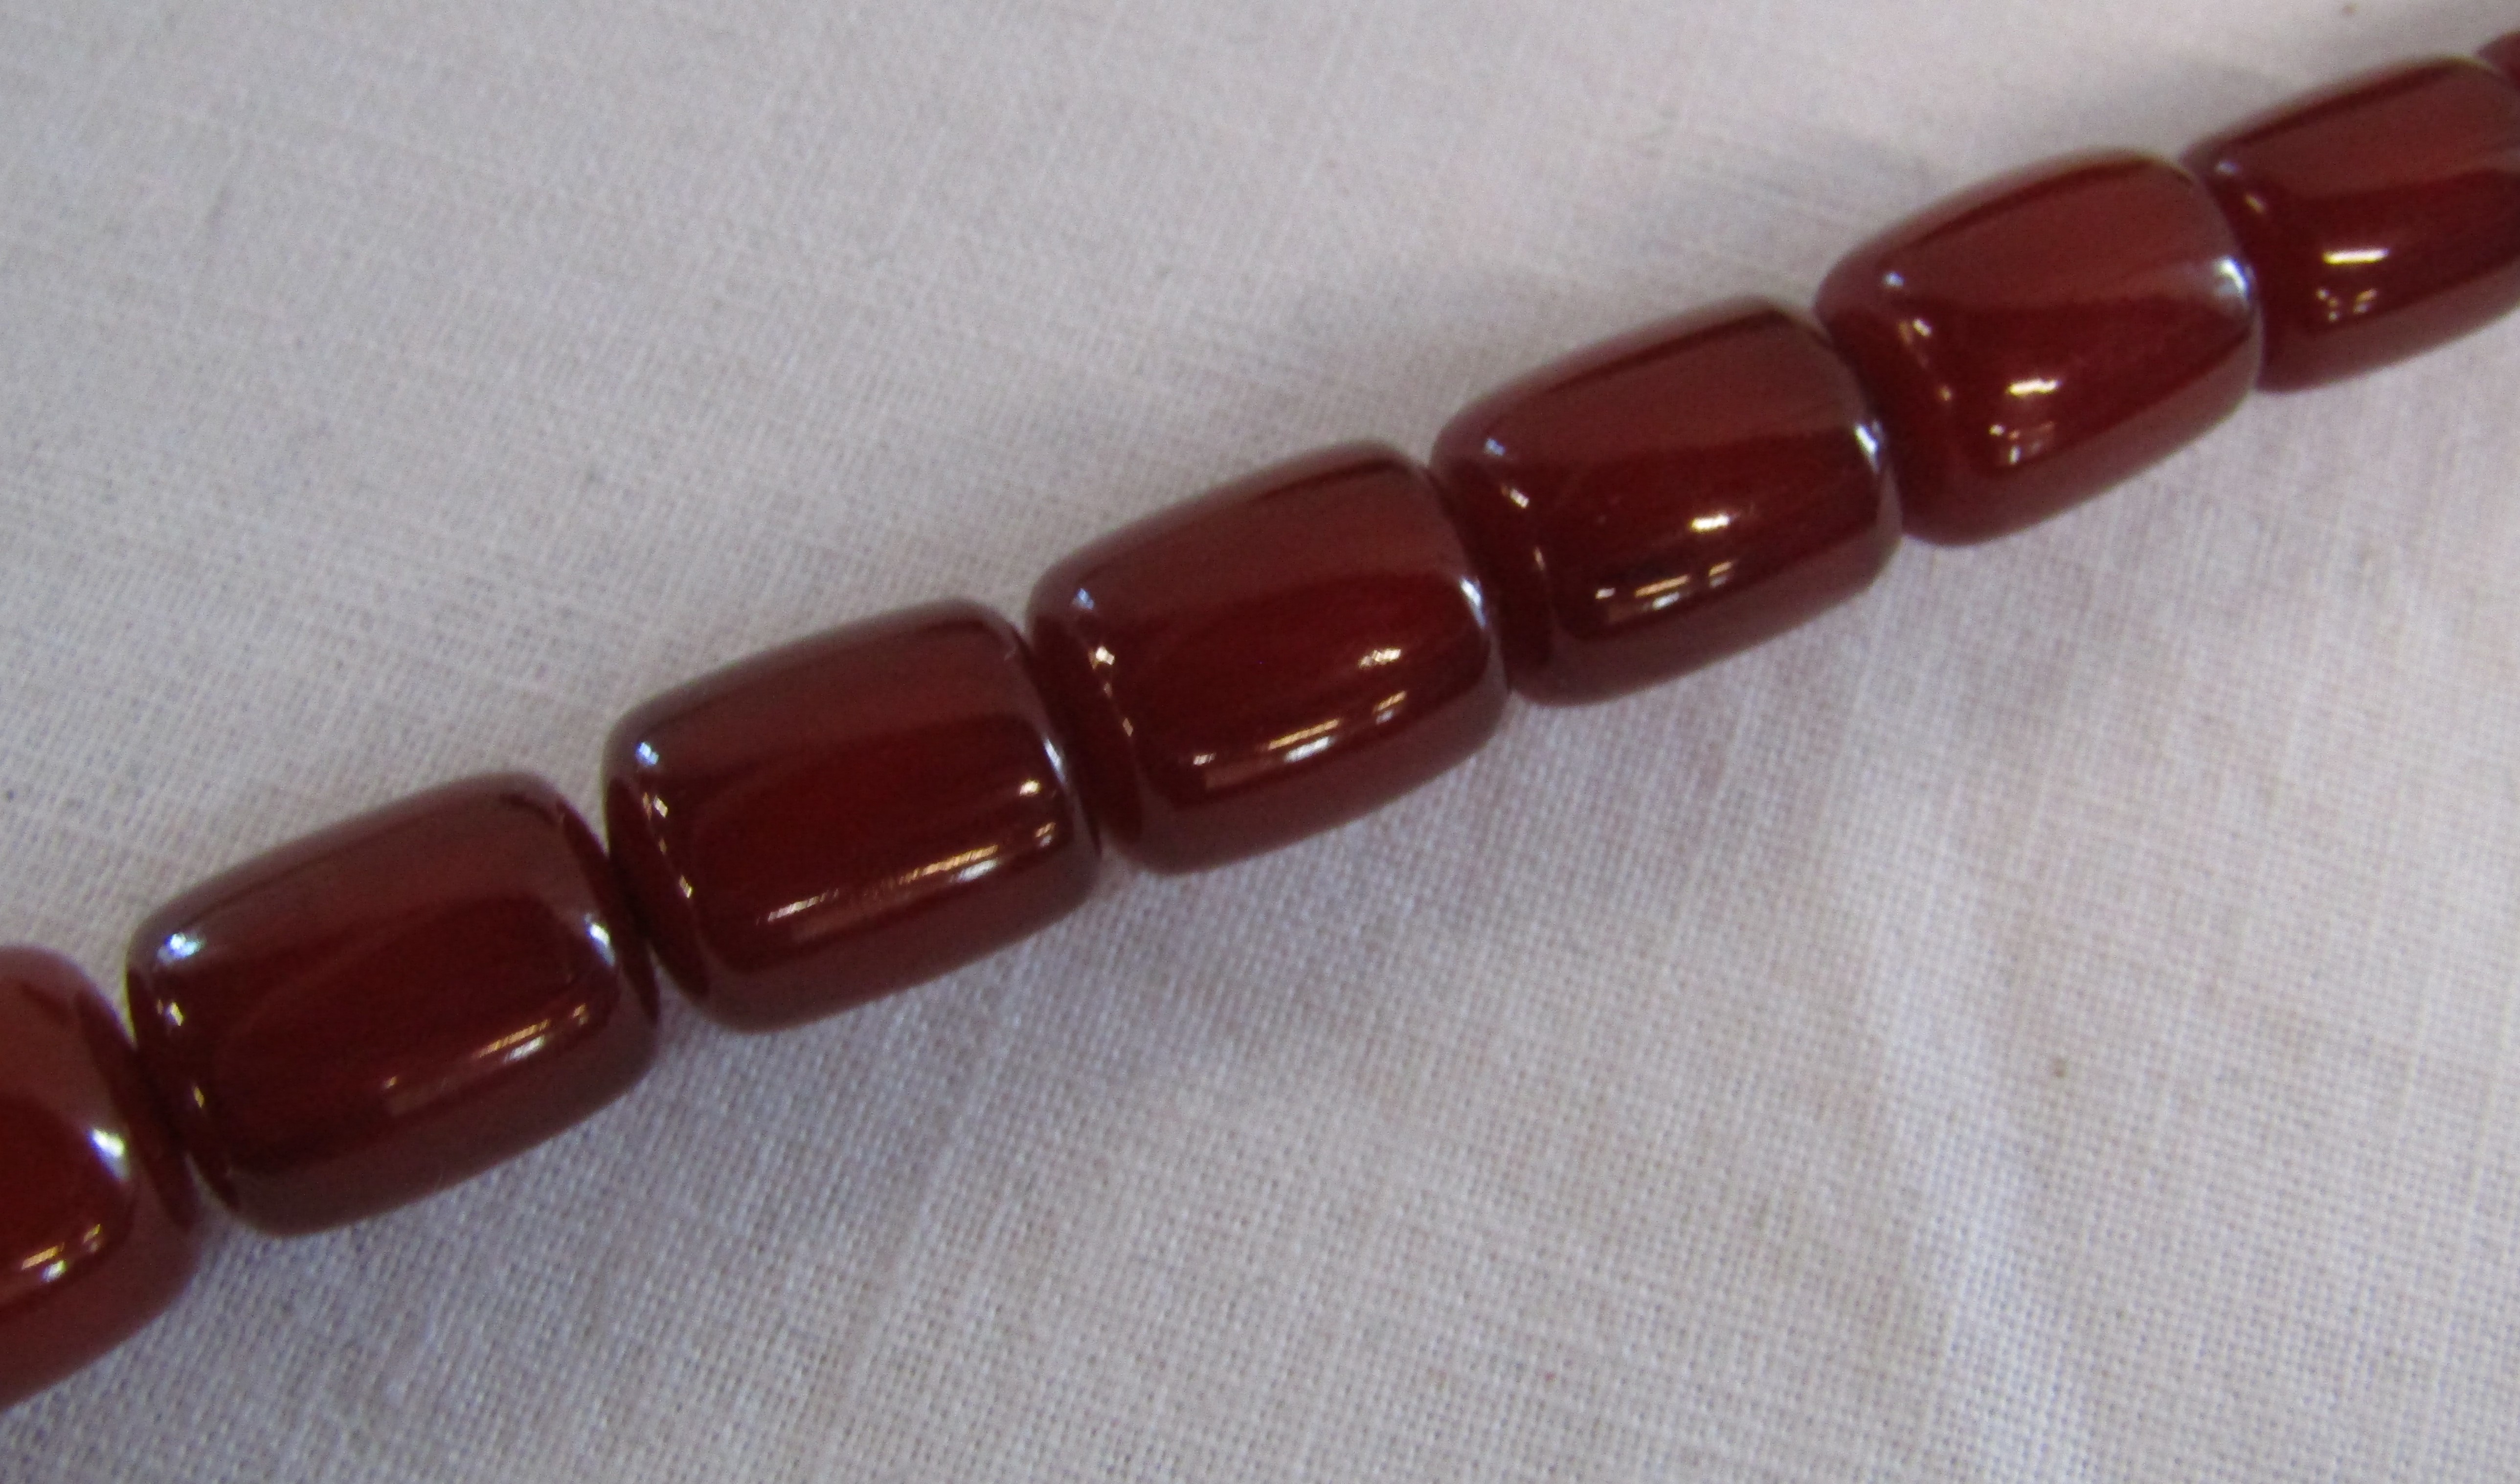 Graduated possibly amber bead necklace 116.6g, largest bead 3cm wide - Image 3 of 12